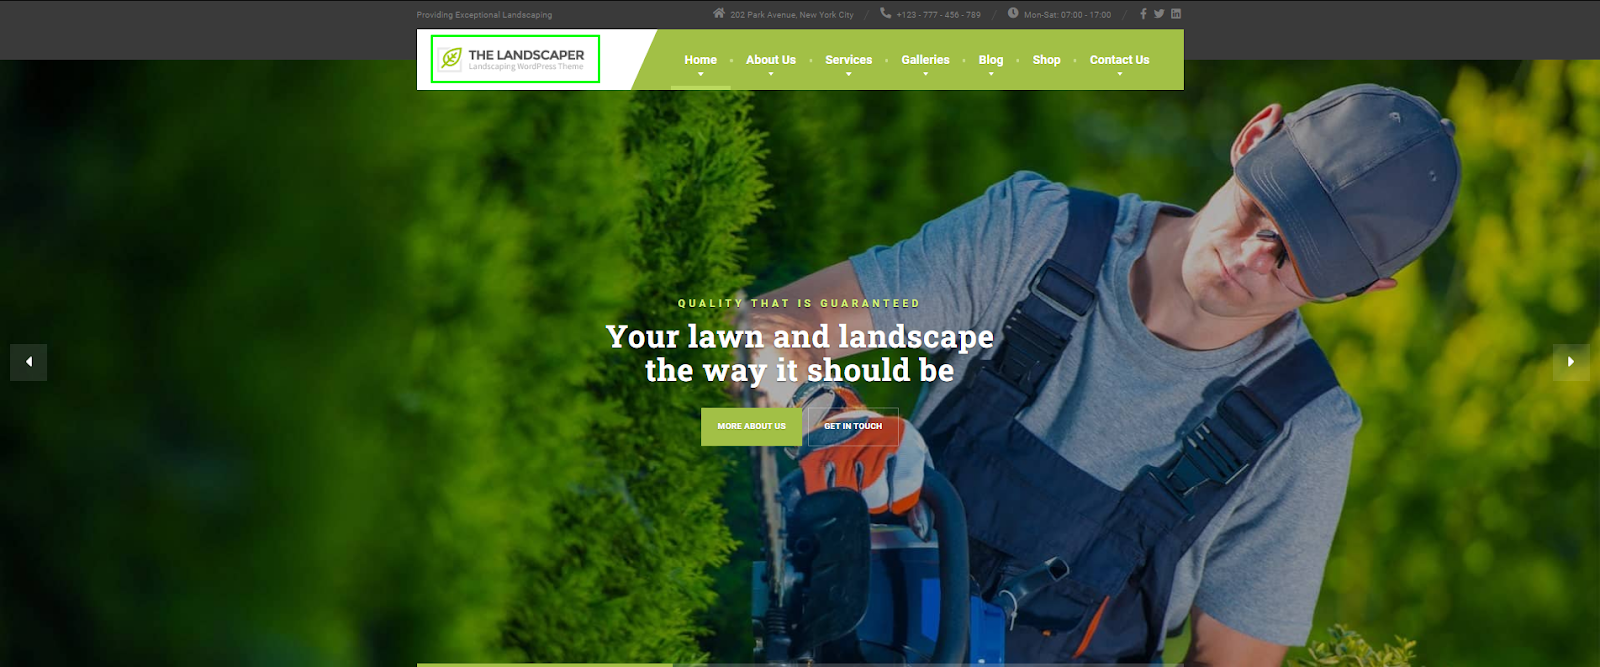 The Landscaper - Lawn and Landscaping WordPress Theme 